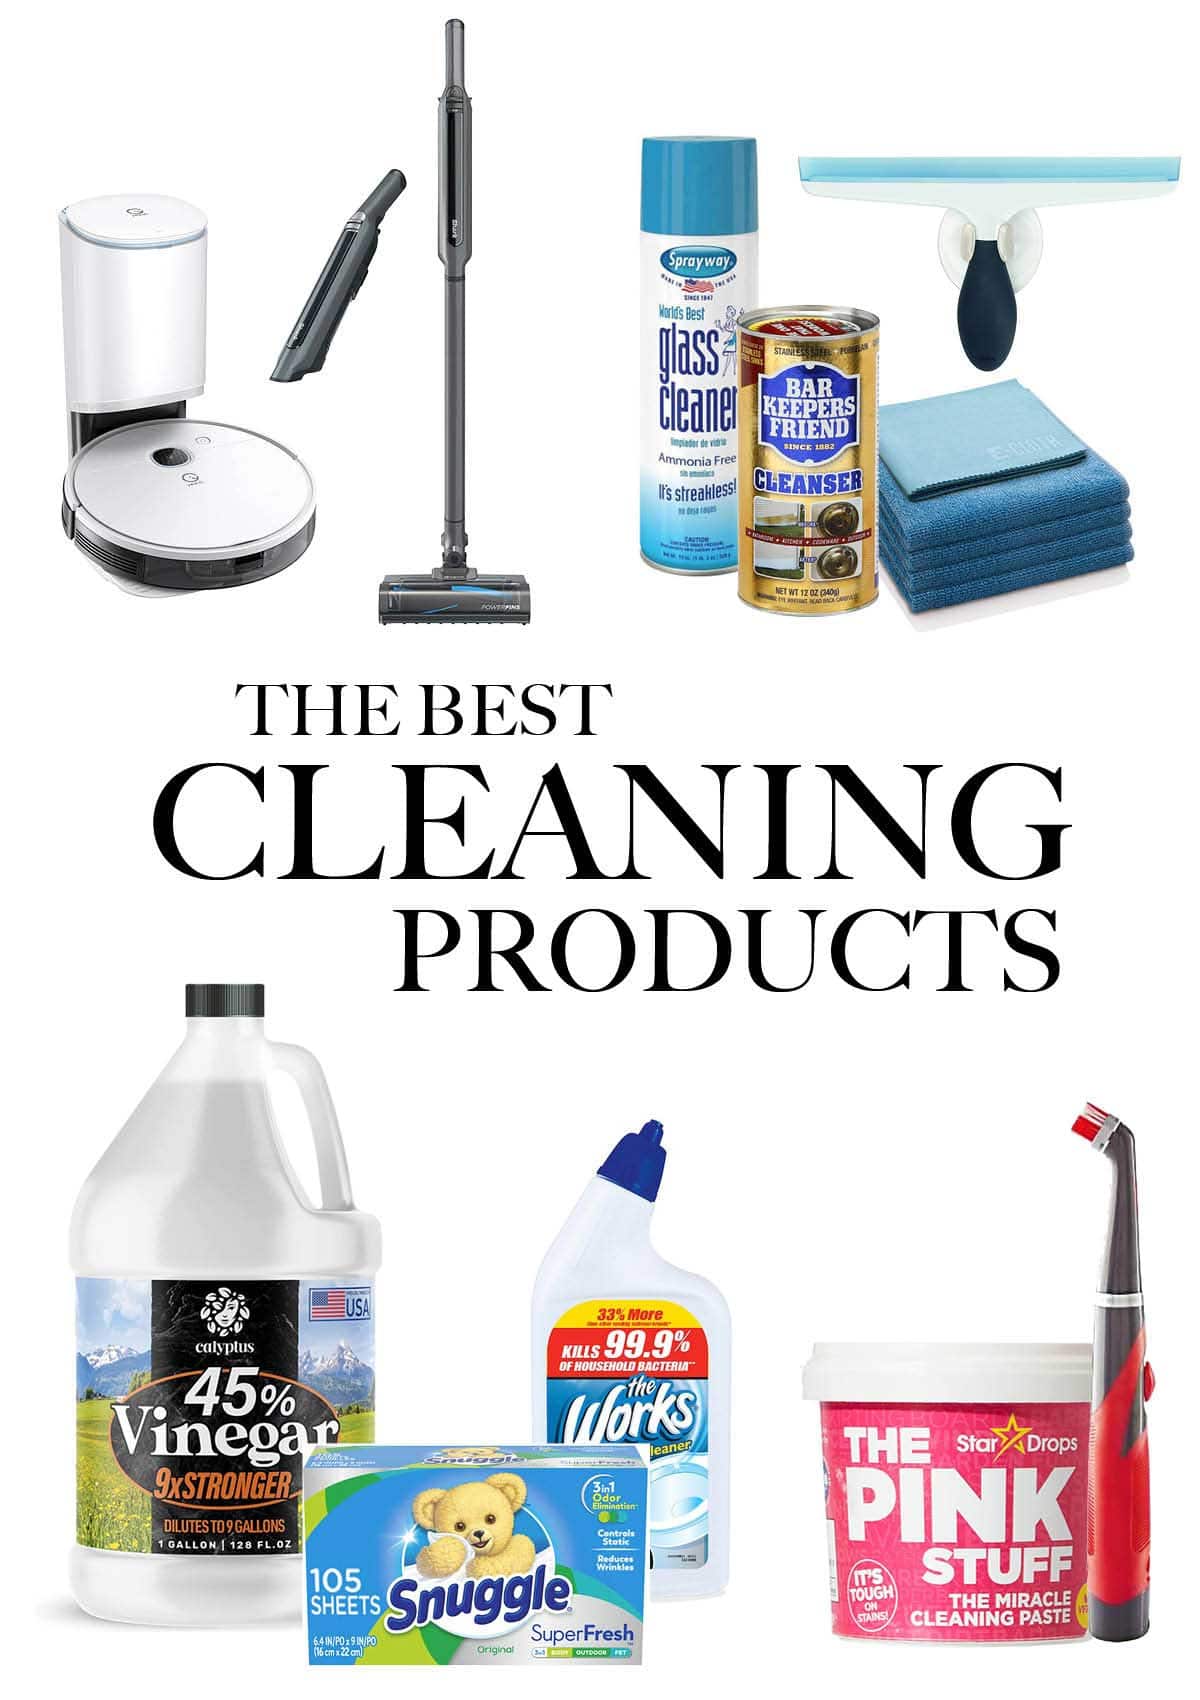 https://houseofhipsters.com/wp-content/uploads/2020/06/best-cleaning-products.jpg